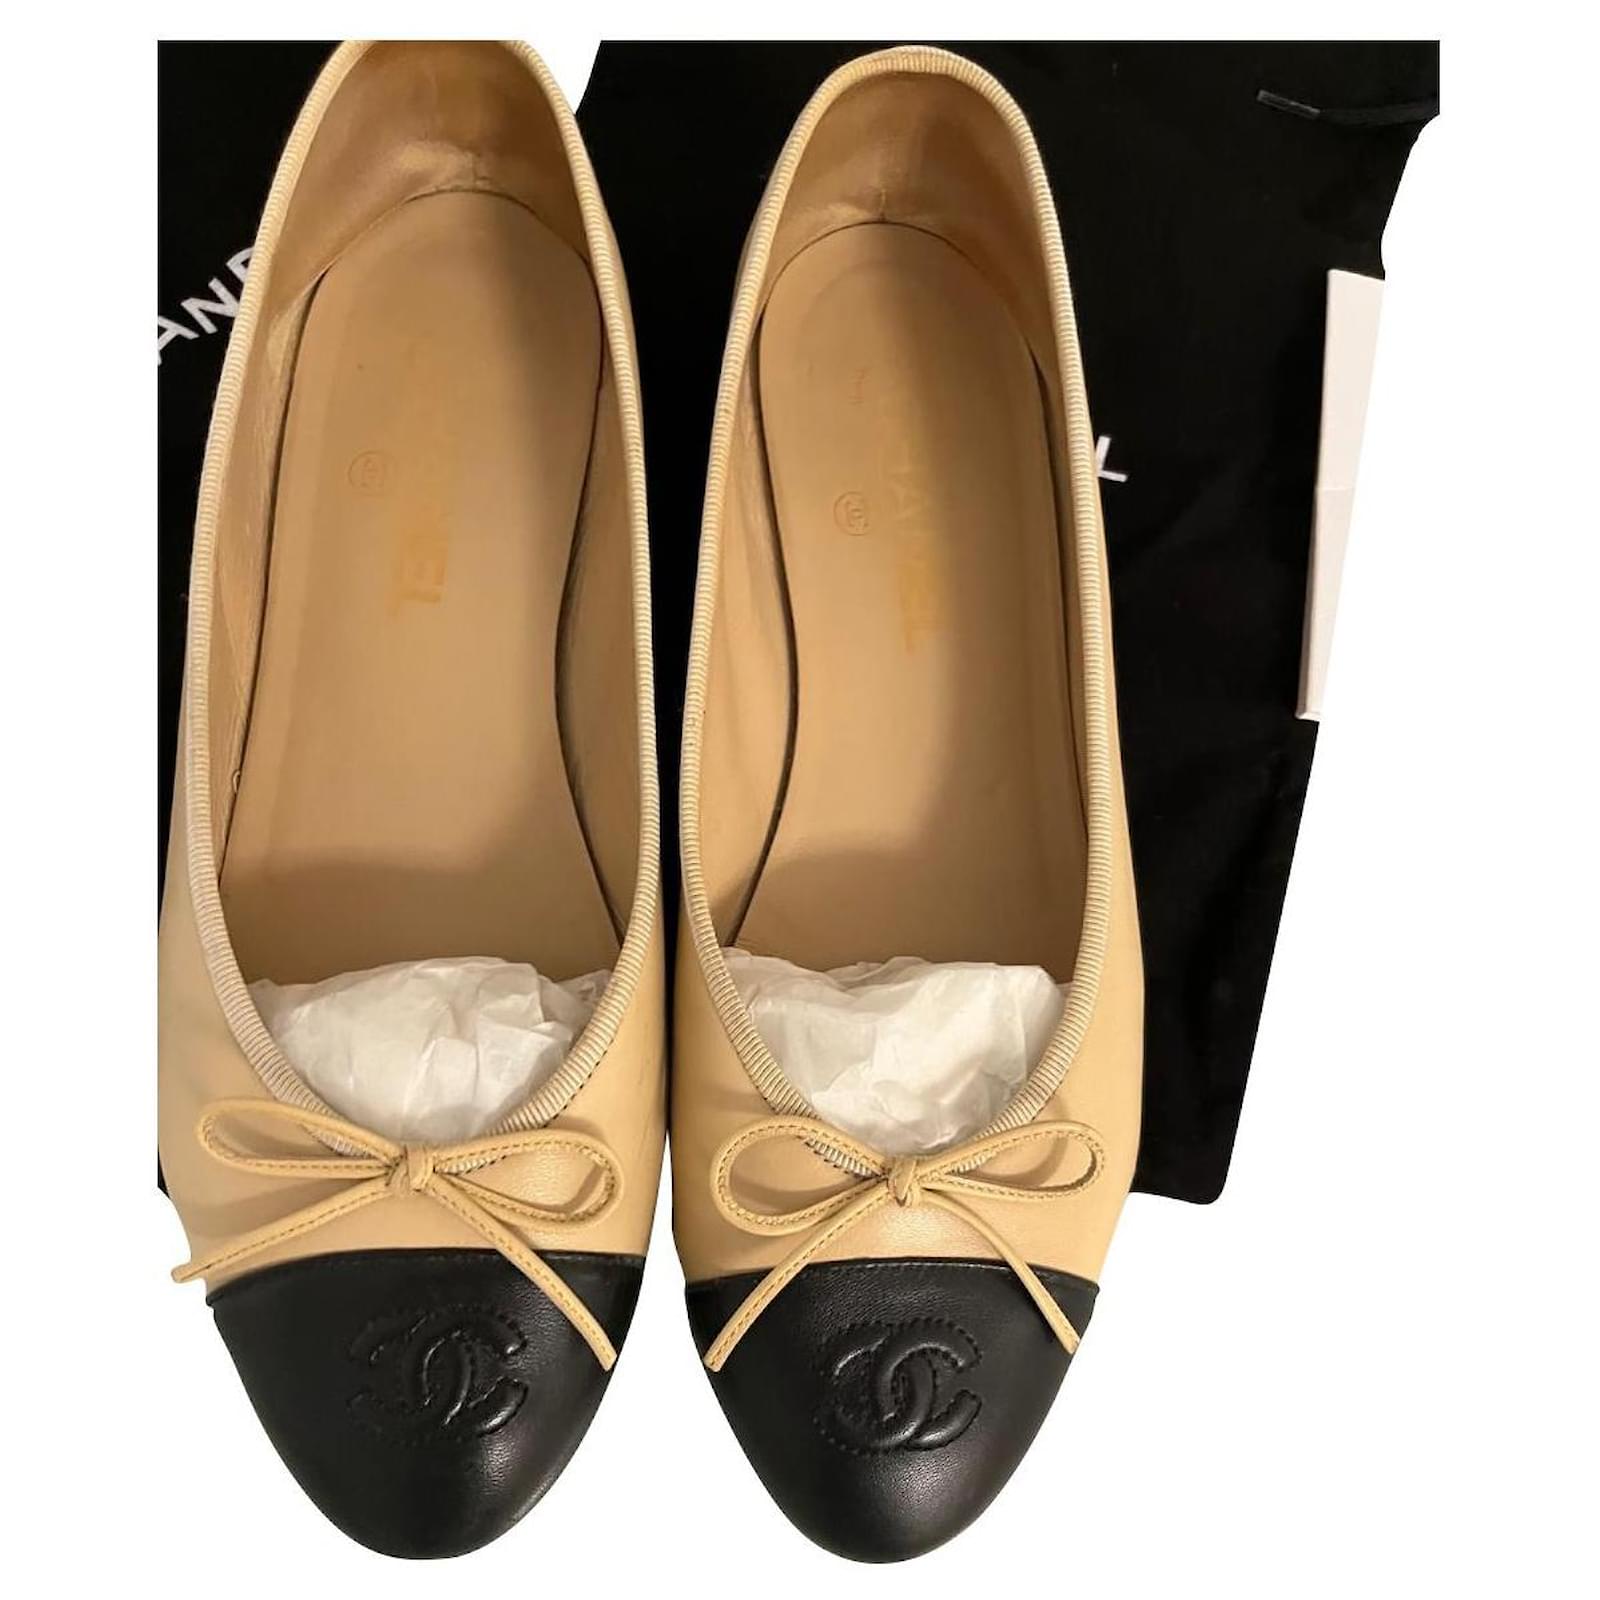 Beige and black Chanel ballet flats size 39,5